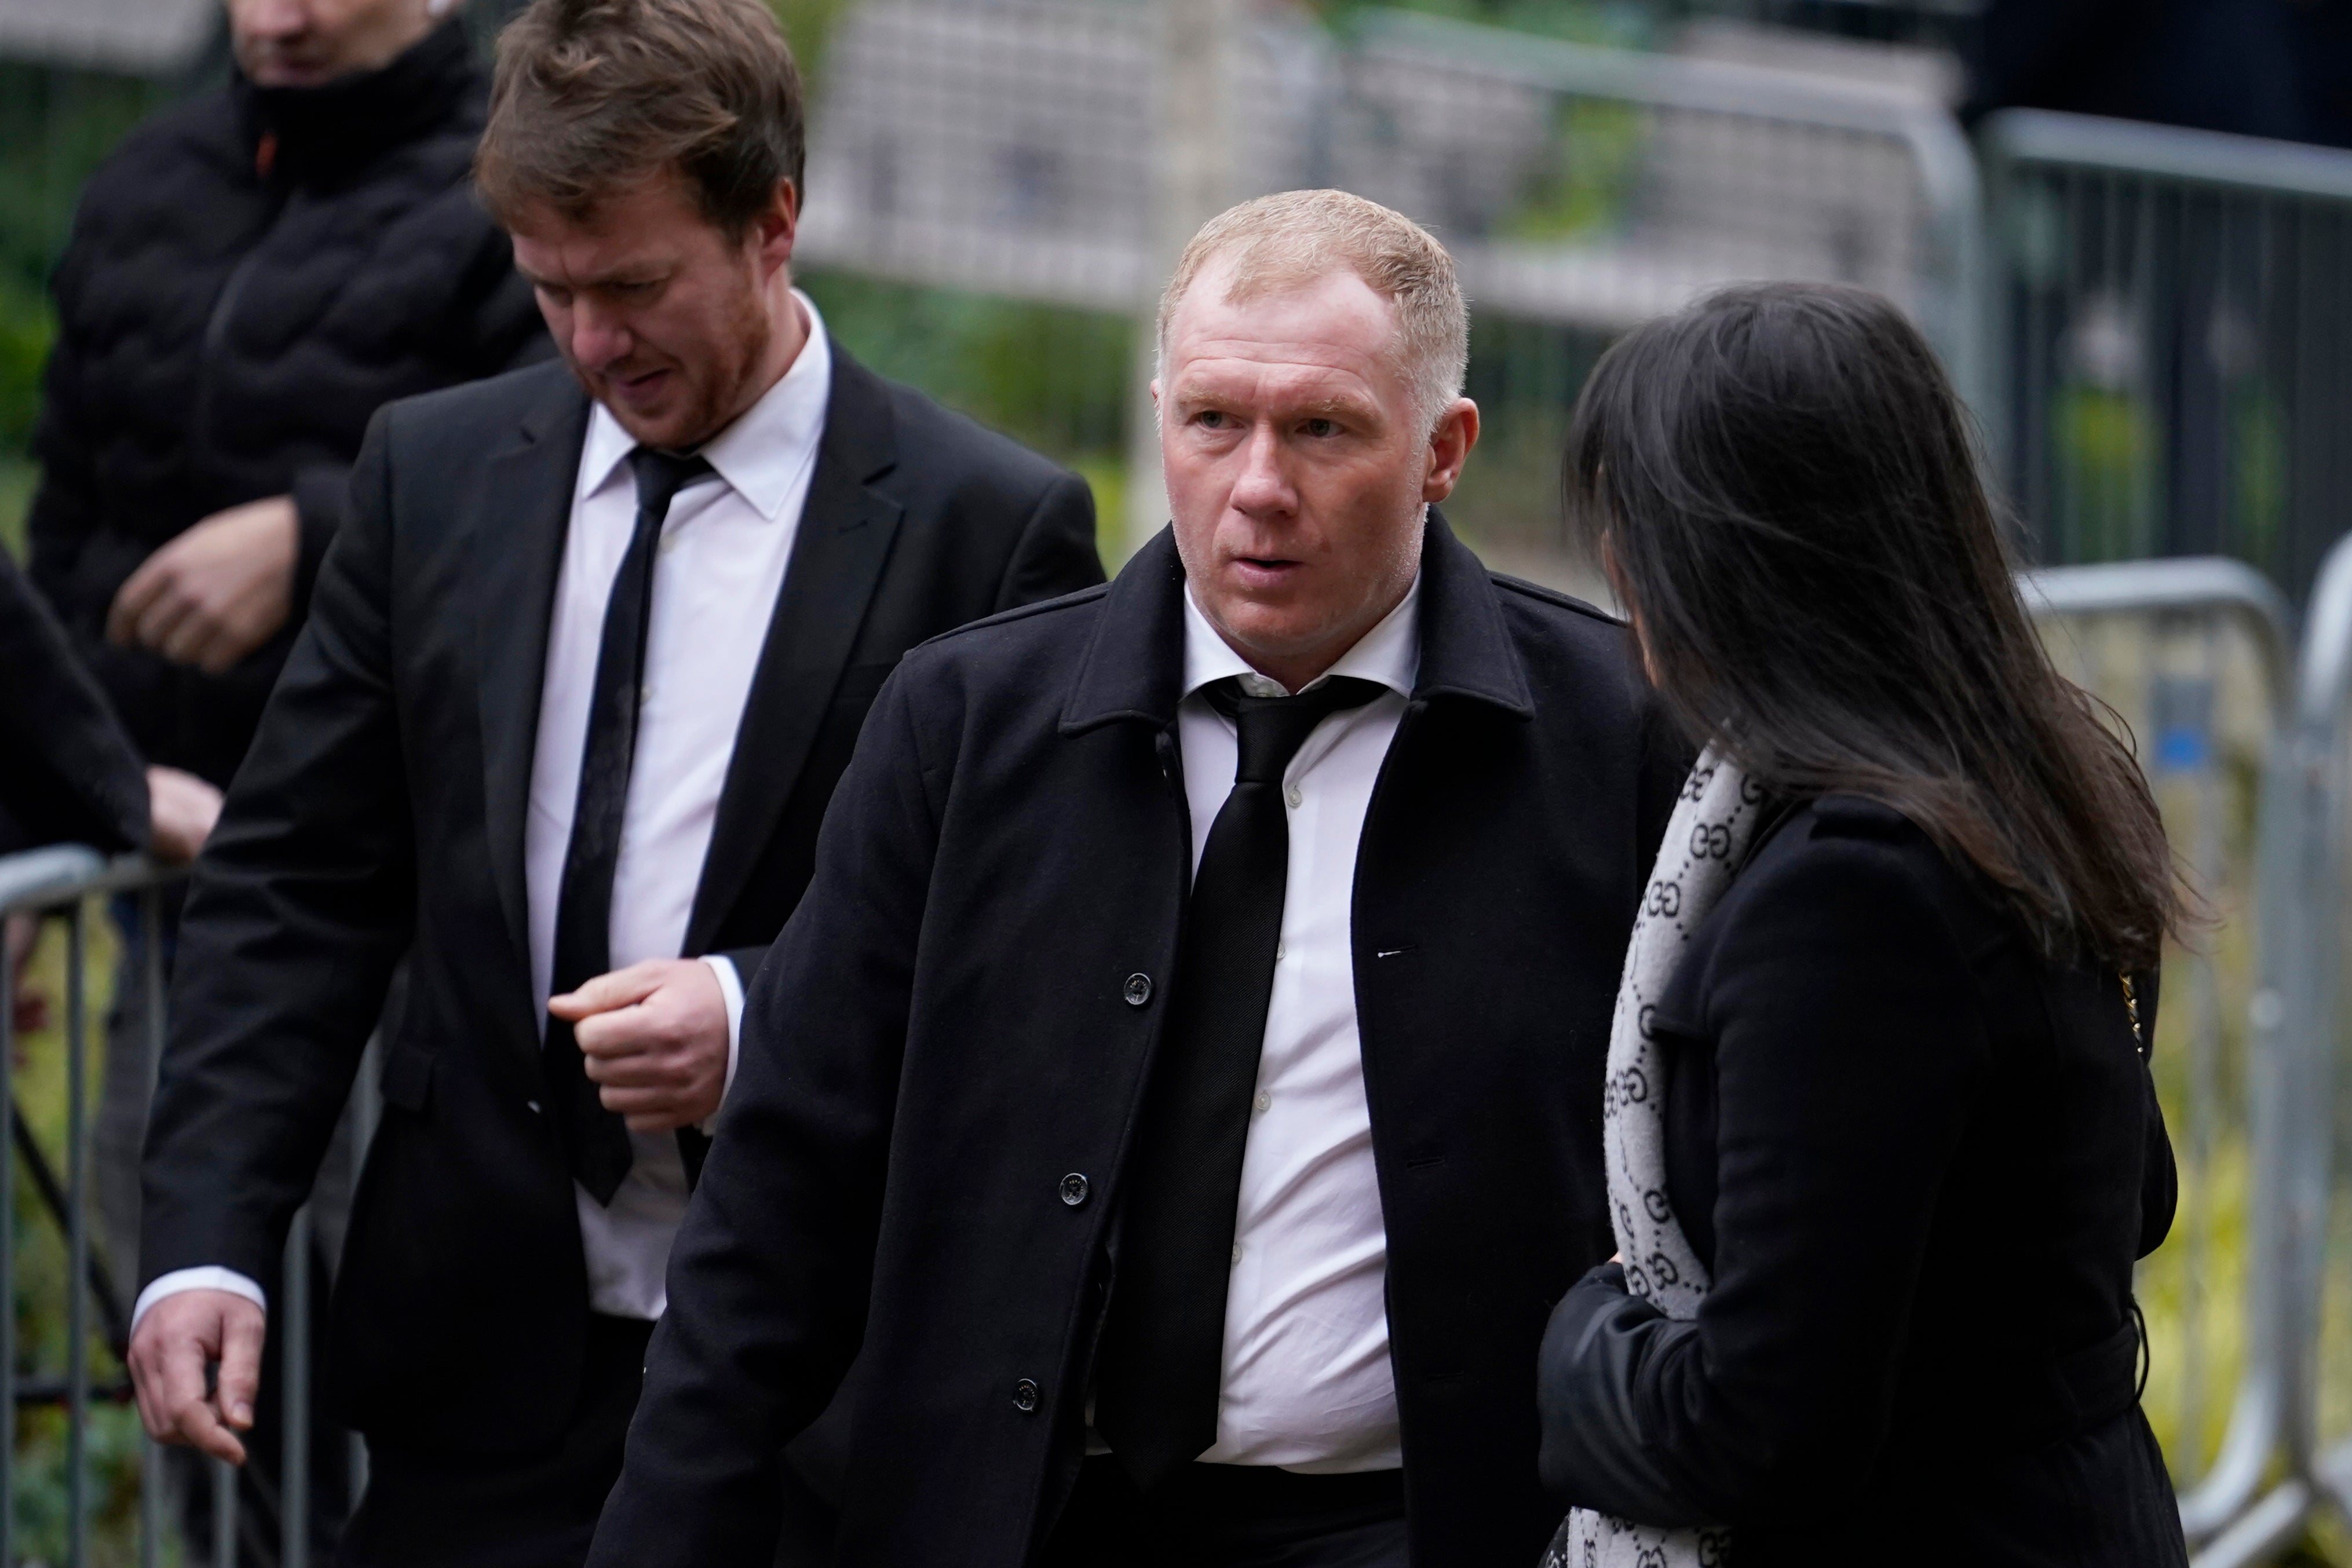 Former midfielder Paul Scholes arrives at the funeral